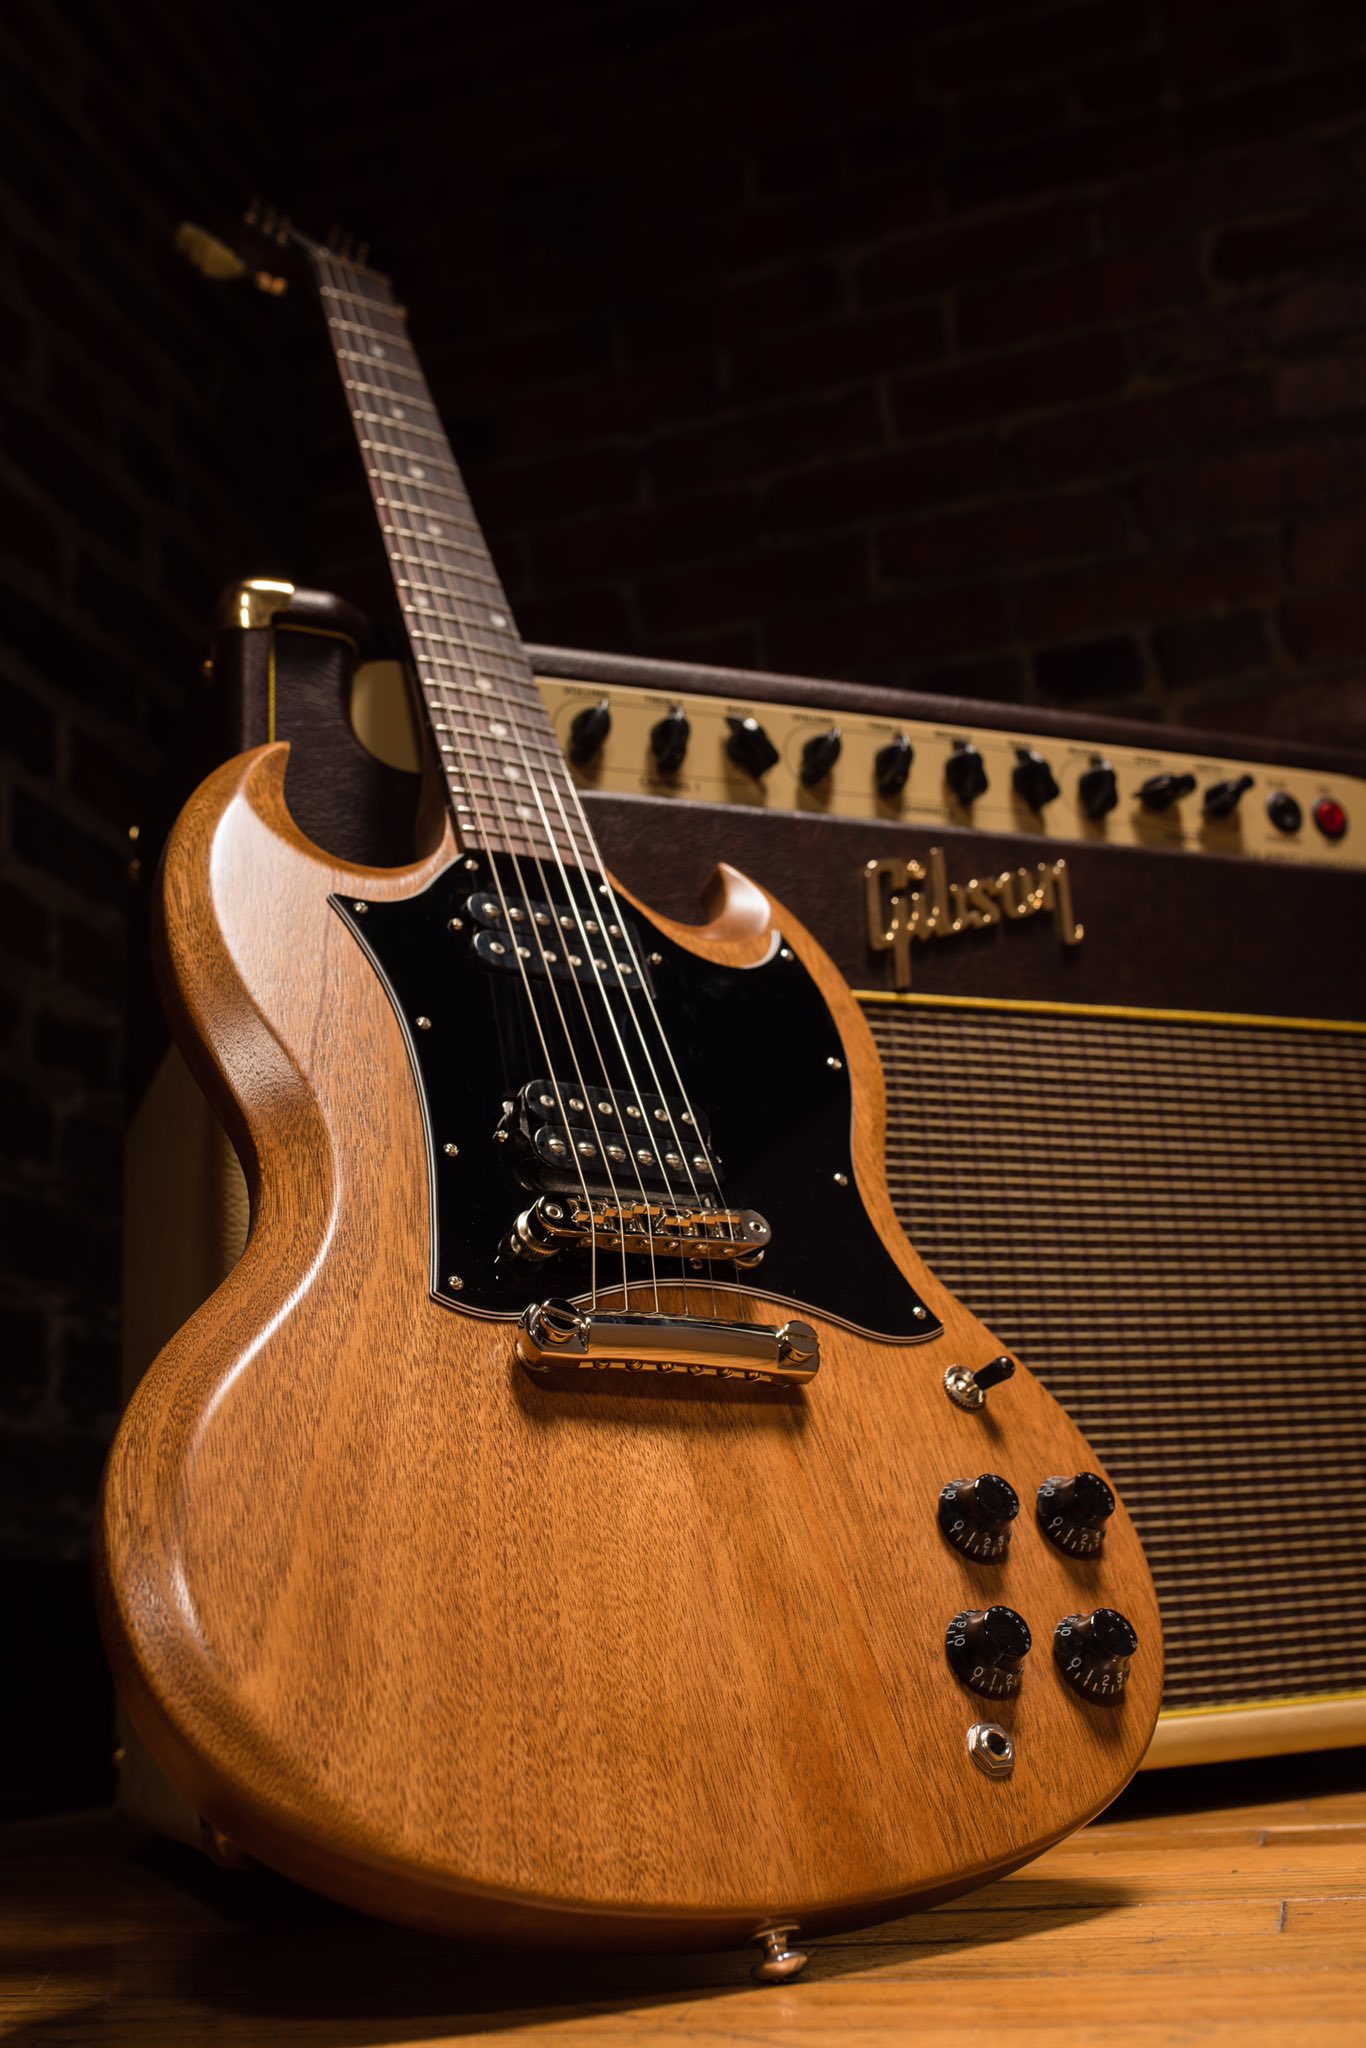 Gibson on Twitter: "Available in Vintage Cherry Satin, and Natural Walnut Satin, the SG Standard Tribute boasts a traditional mahogany body and rounded profile maple neck with rosewood fingerboard. #gibson #theoriginal #onlyagibsonisgoodenough